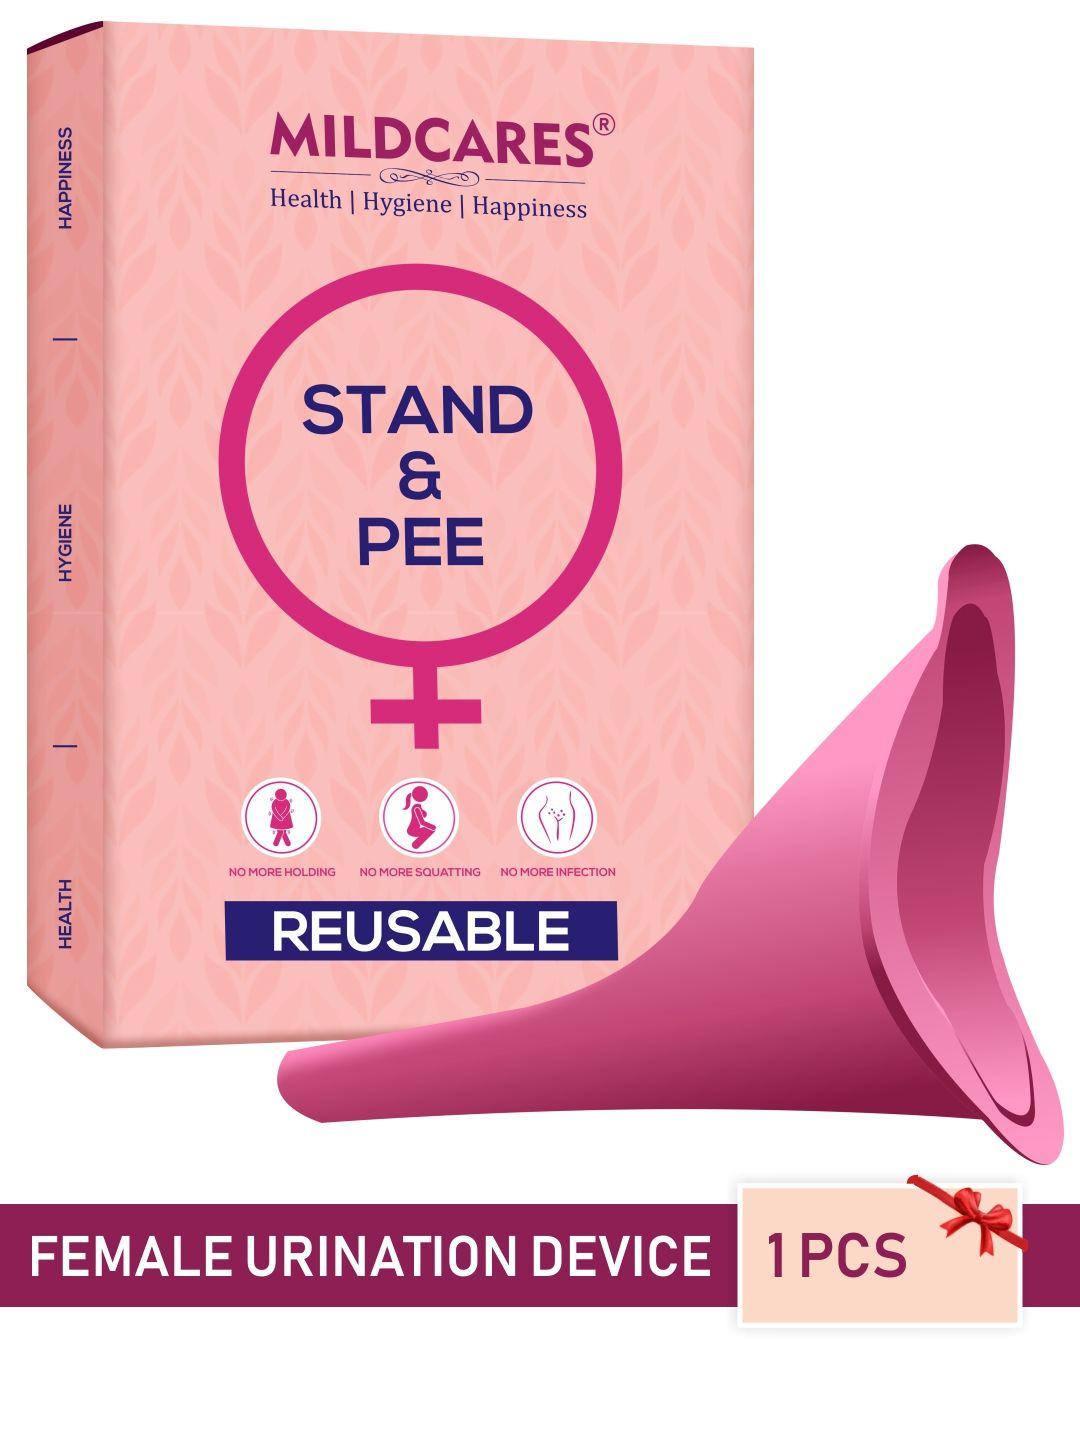 mildcares-women-reusable-stand-and-pee